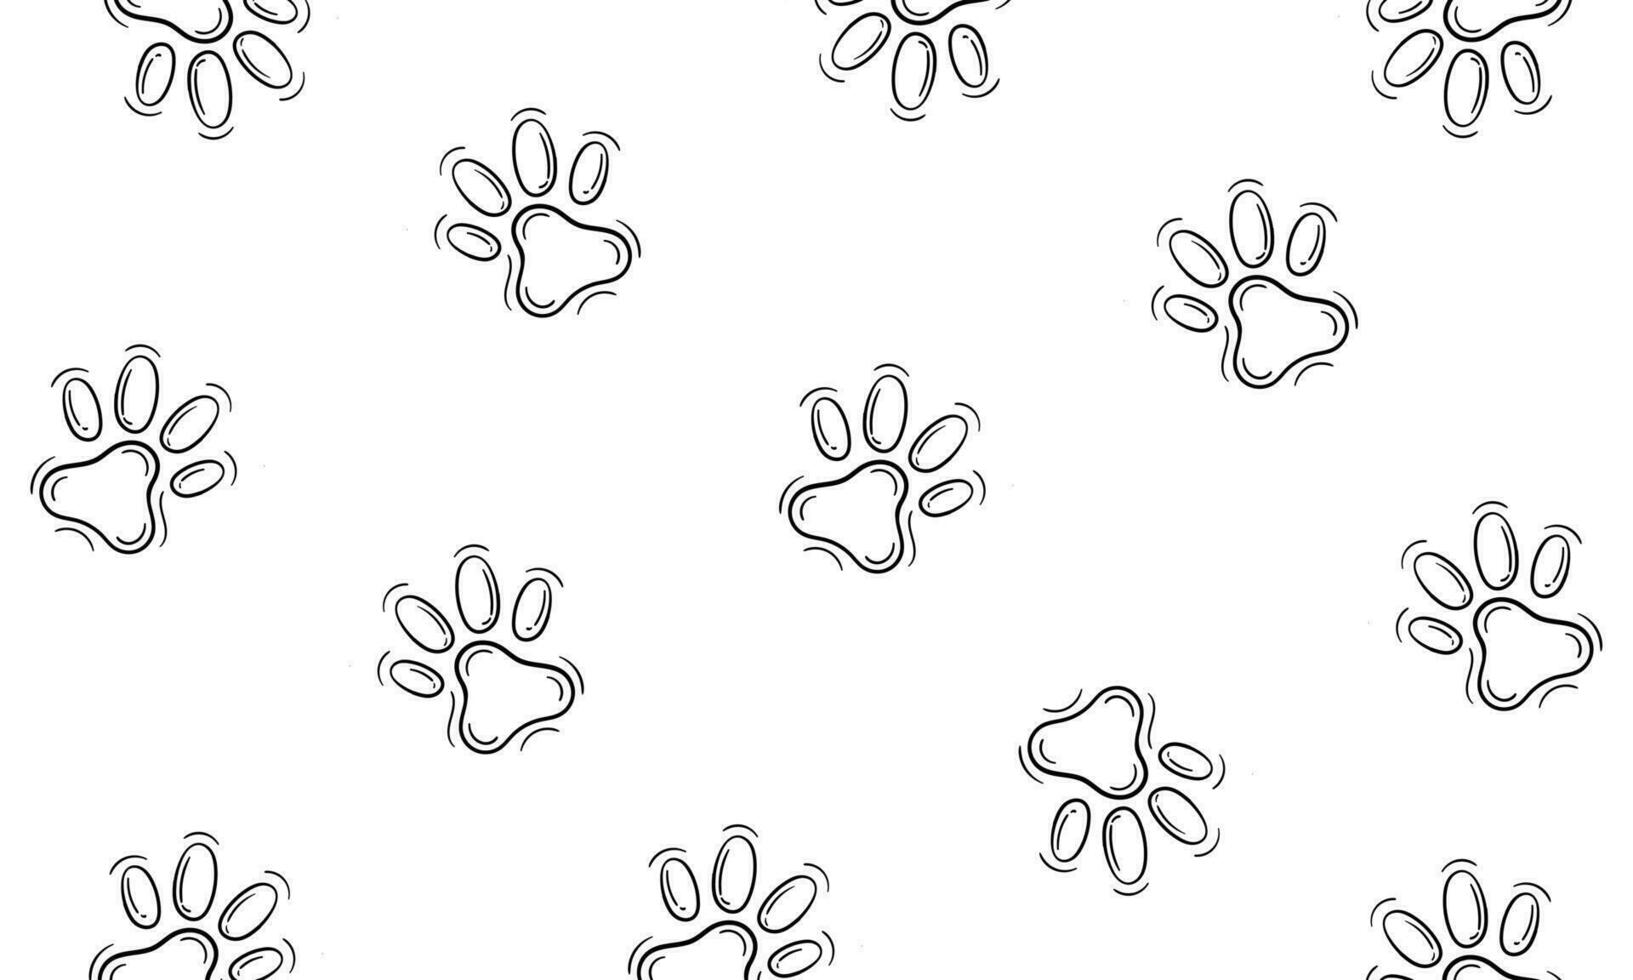 hand drawn pattern of dog or cat footprints2 vector